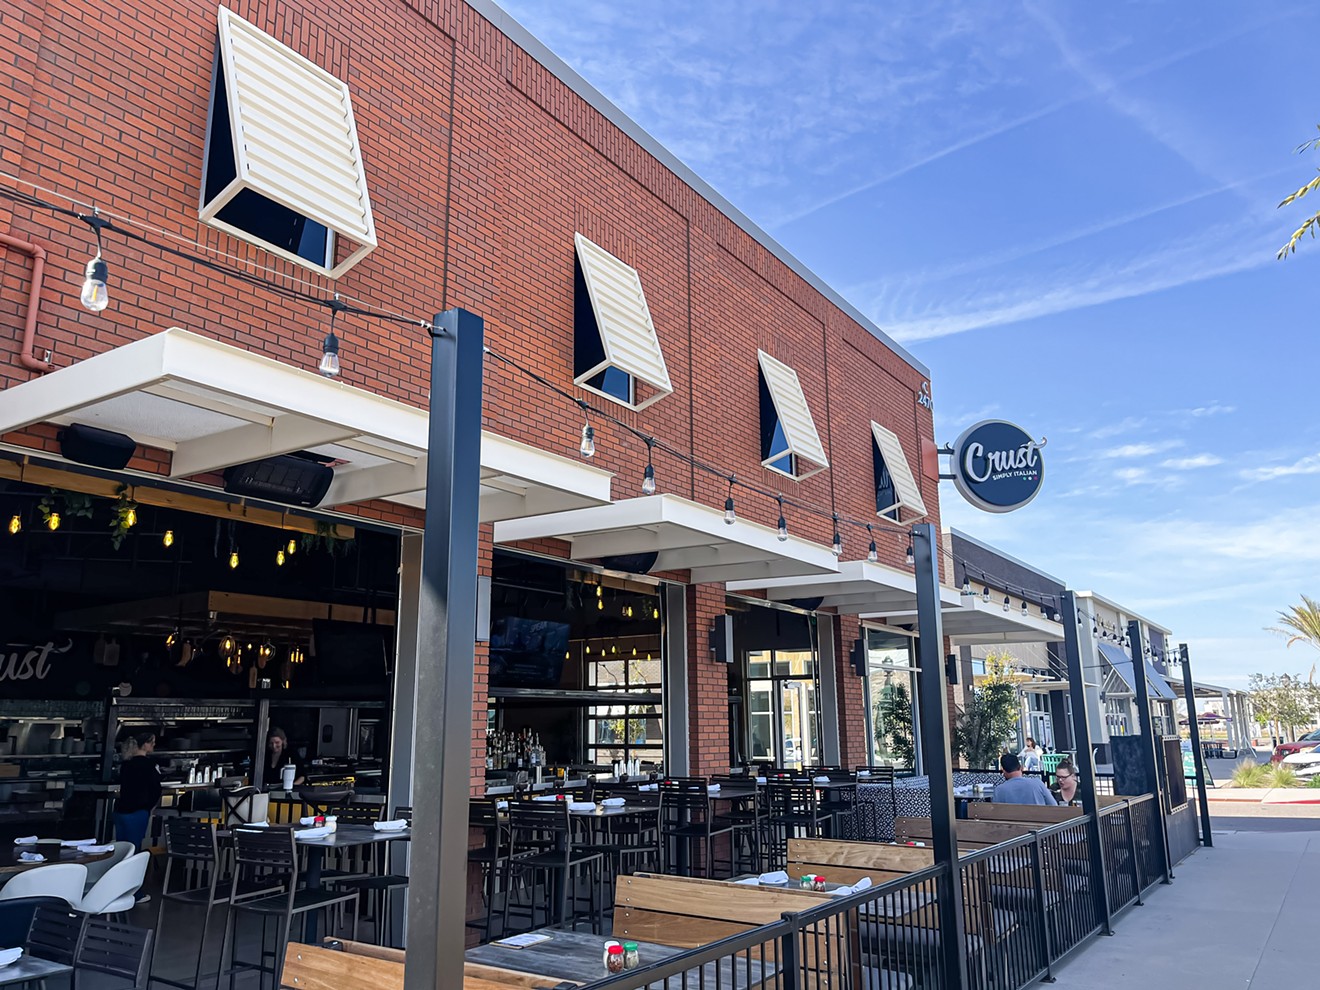 The restaurant will include a wrap-around patio and garage doors that create an indoor-outdoor feel. Pictured here is Crust's Gilbert location.